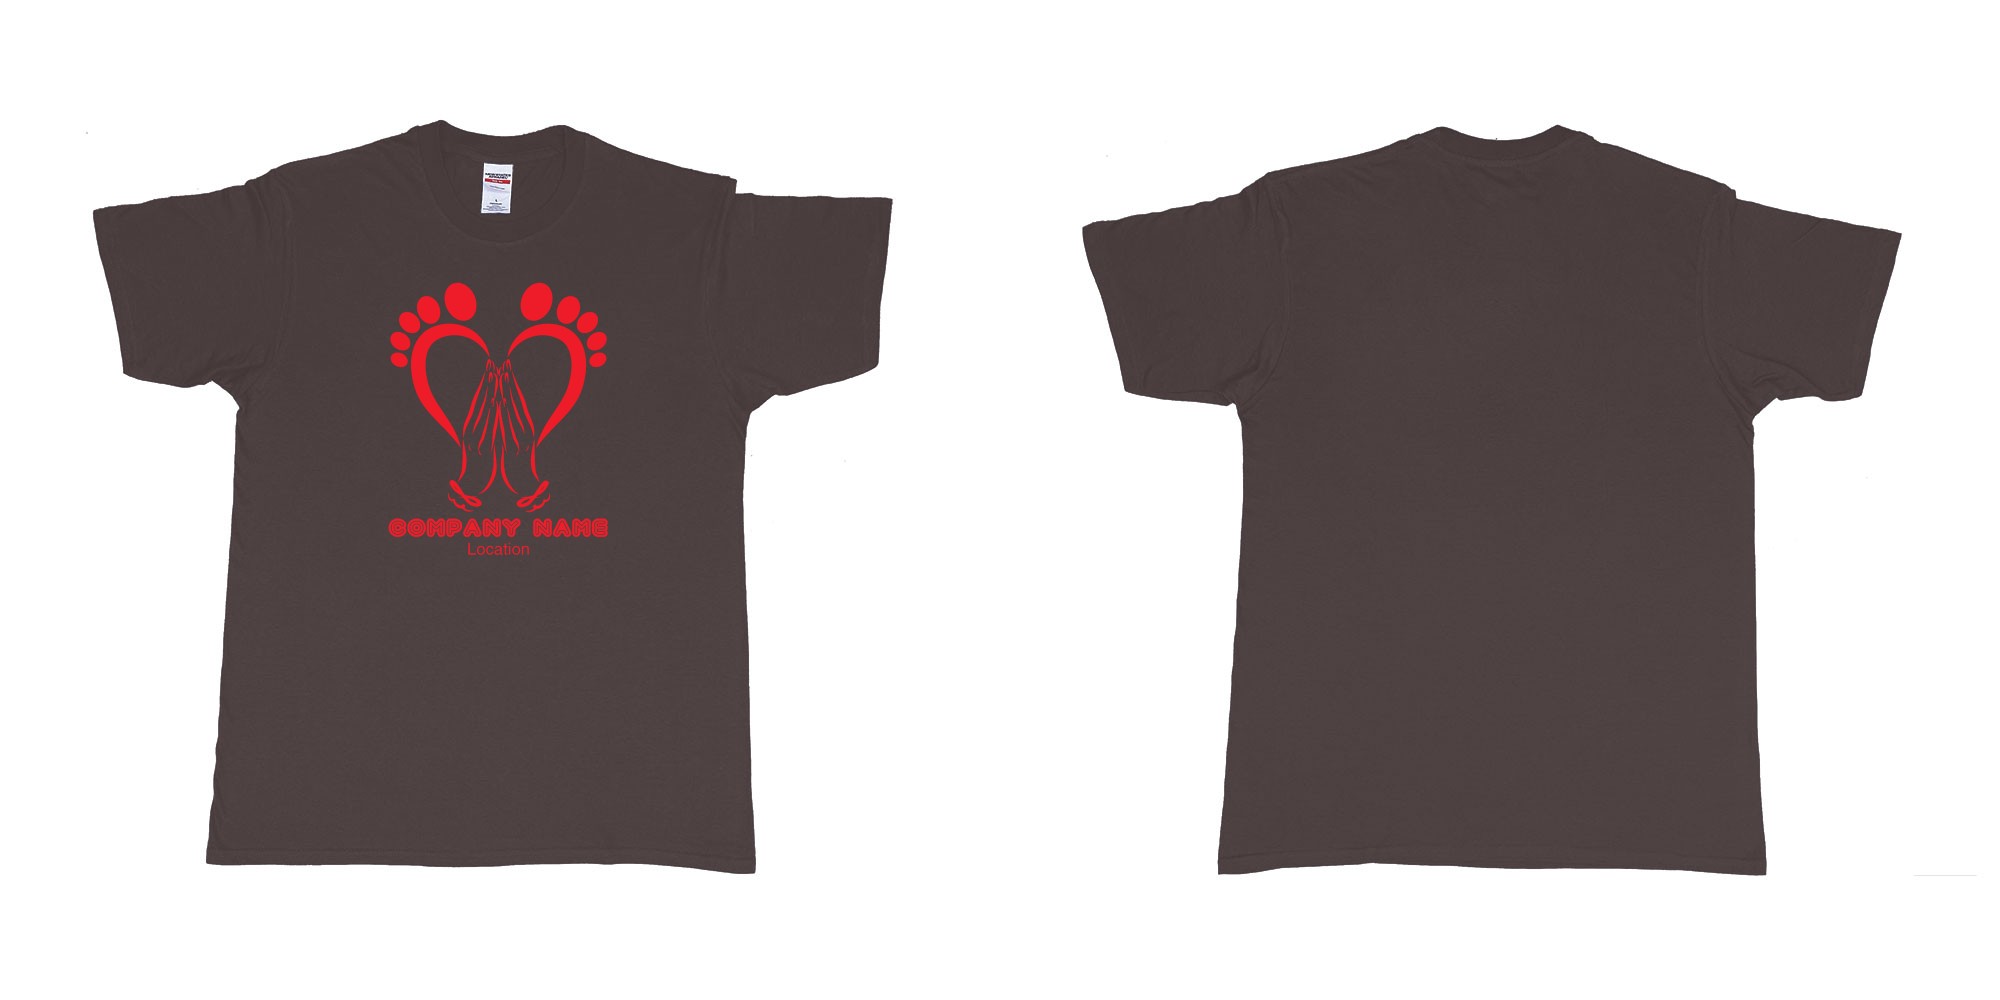 Custom tshirt design podiatrist chiropodist feet care specialist heart shaped feet with caring hands in fabric color dark-chocolate choice your own text made in Bali by The Pirate Way